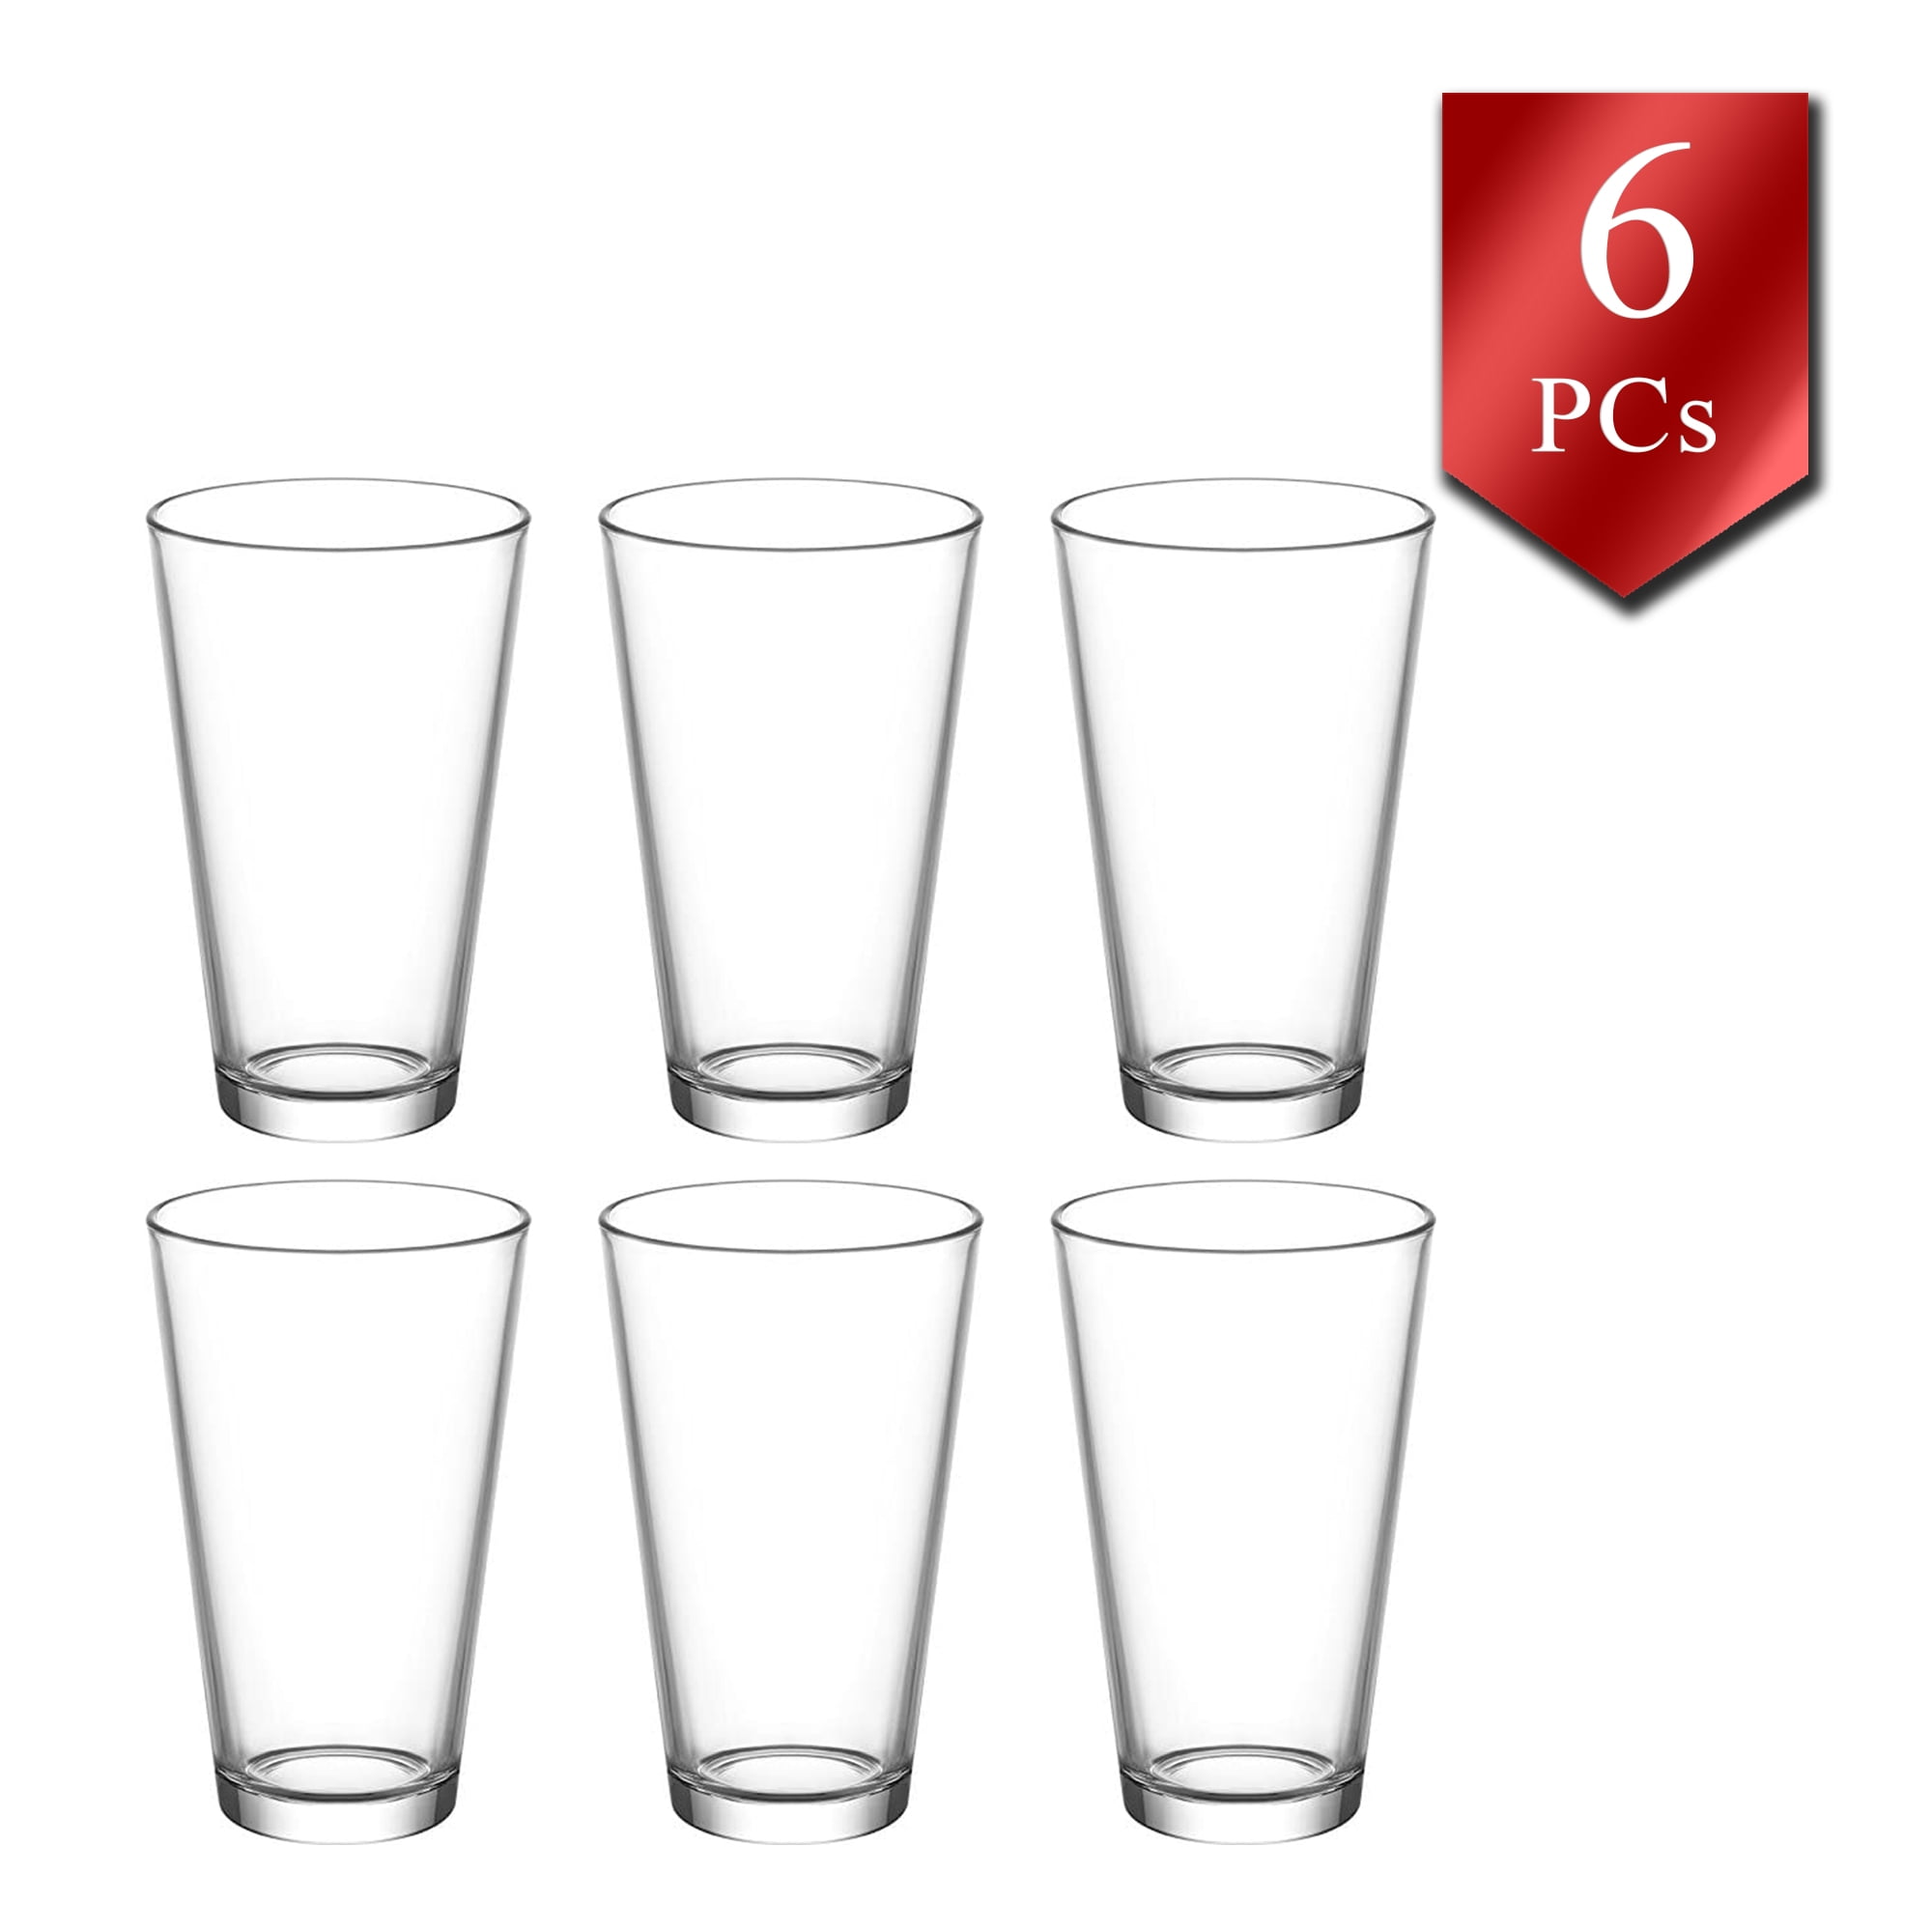 Water Whiskey Juice Tumblers Modern Design and Sturdy Make 6 Clear 6 Piece 280ml Drinking Glasses Set